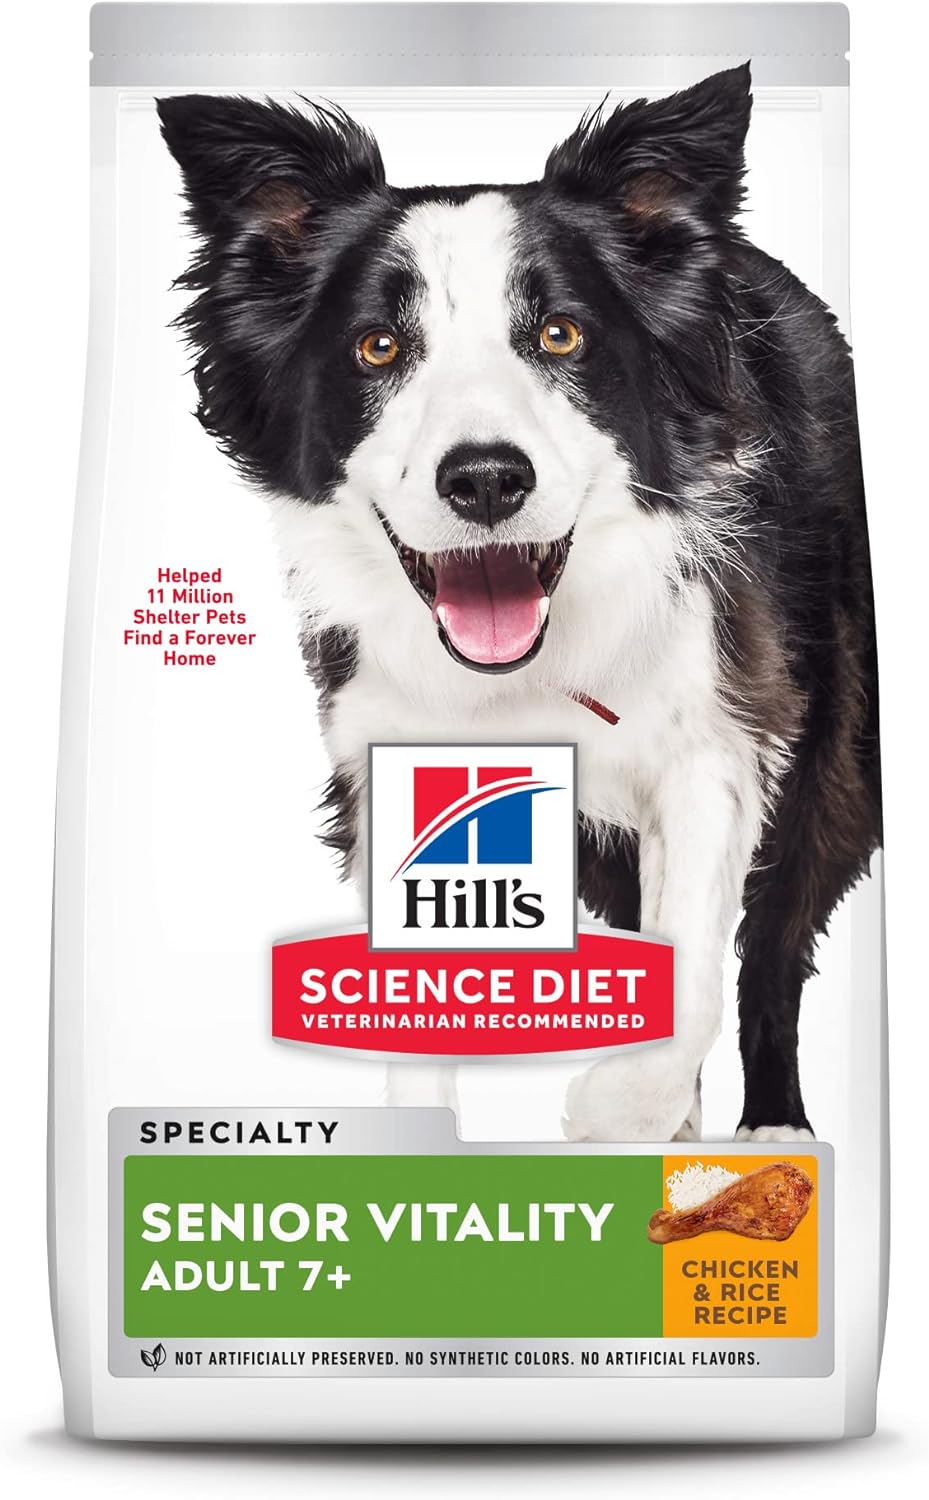 Hill’s Science Diet Adult 7+ Senior Vitality Chicken & Rice Recipe Dry Dog Food – Gallery Image 1